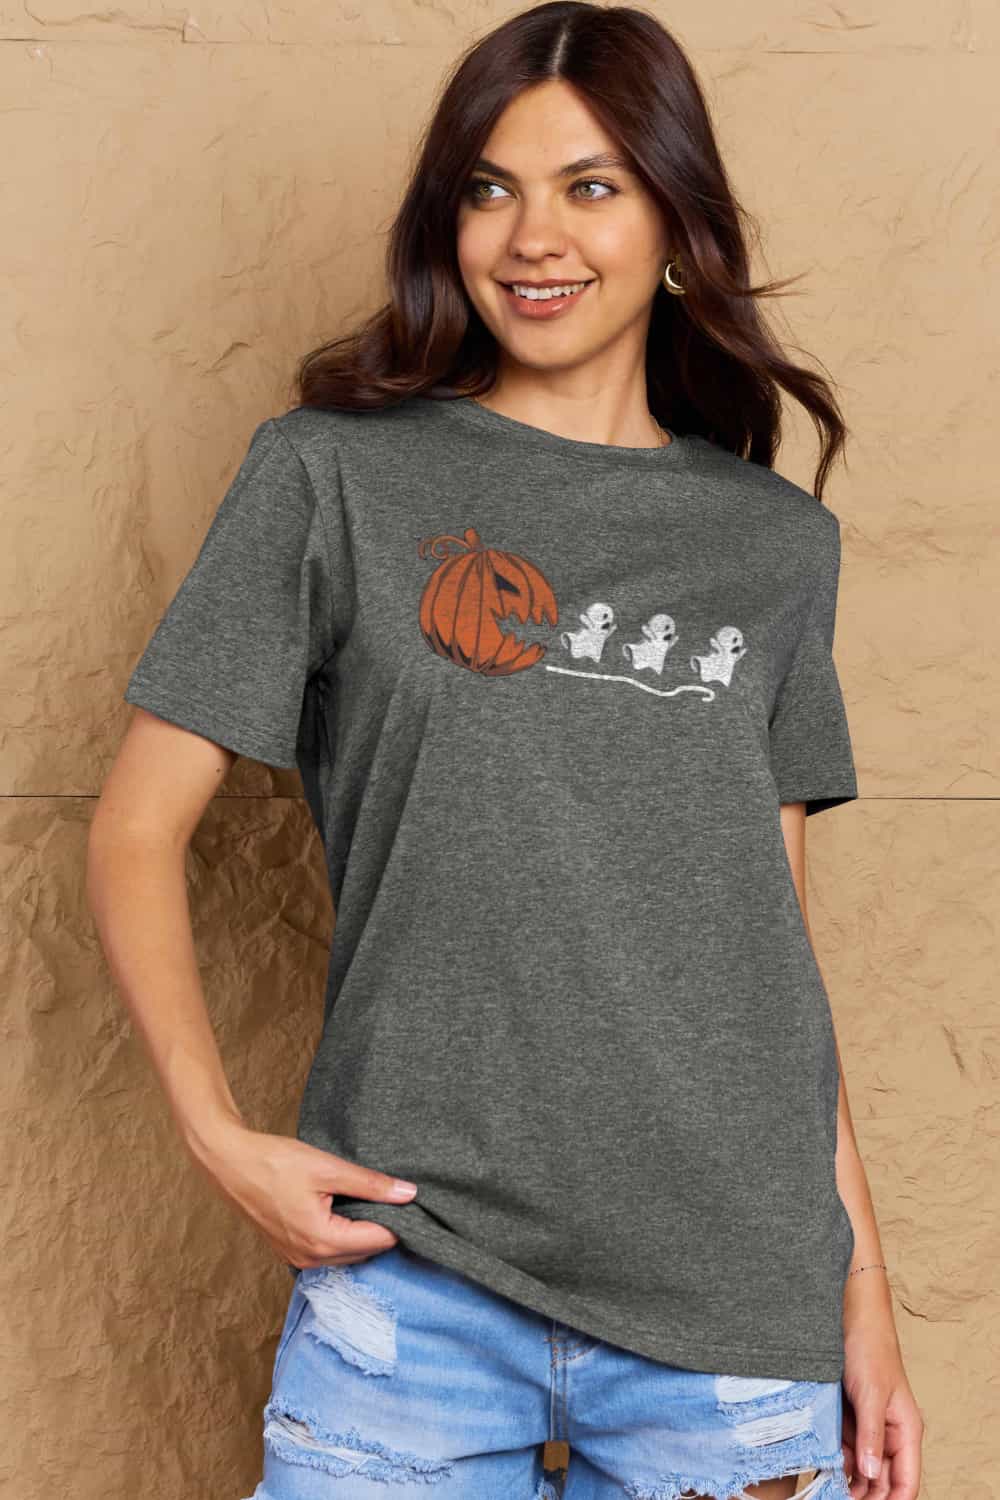 Simply Love Full Size Jack-O'-Lantern Graphic Cotton T-Shirt - GemThreads Boutique